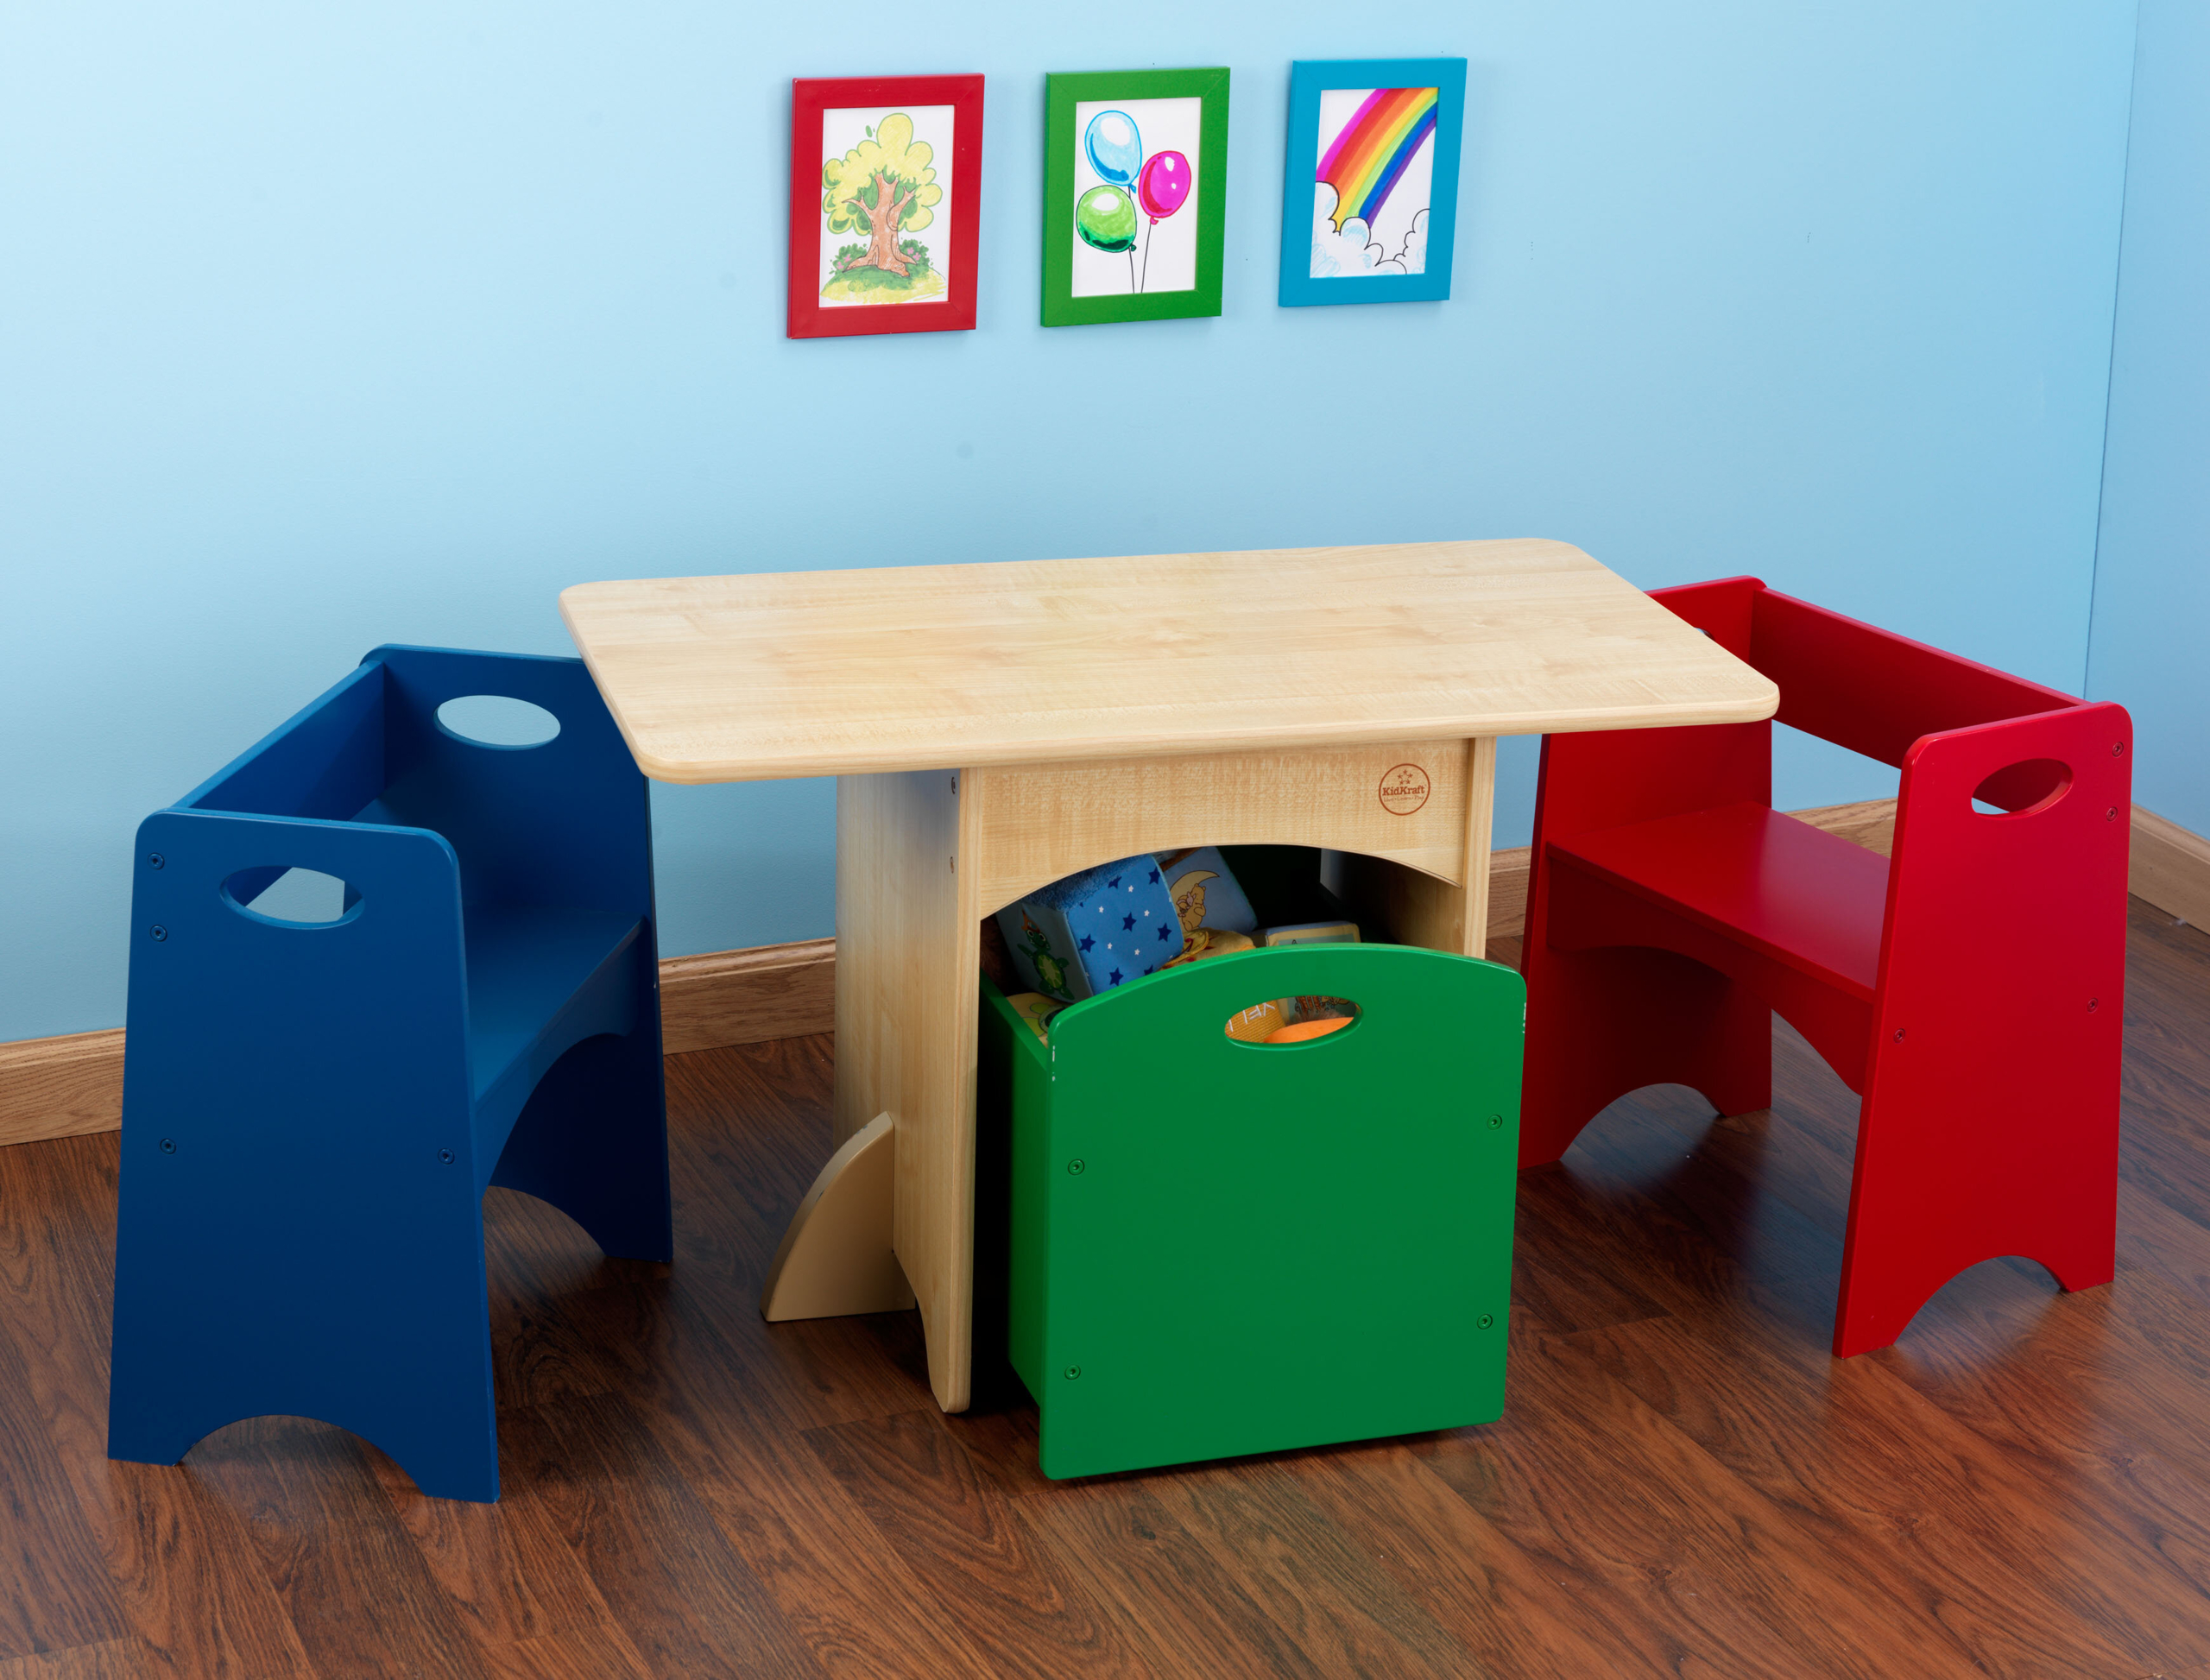 Check out the kidkraft natural table with primary benches from